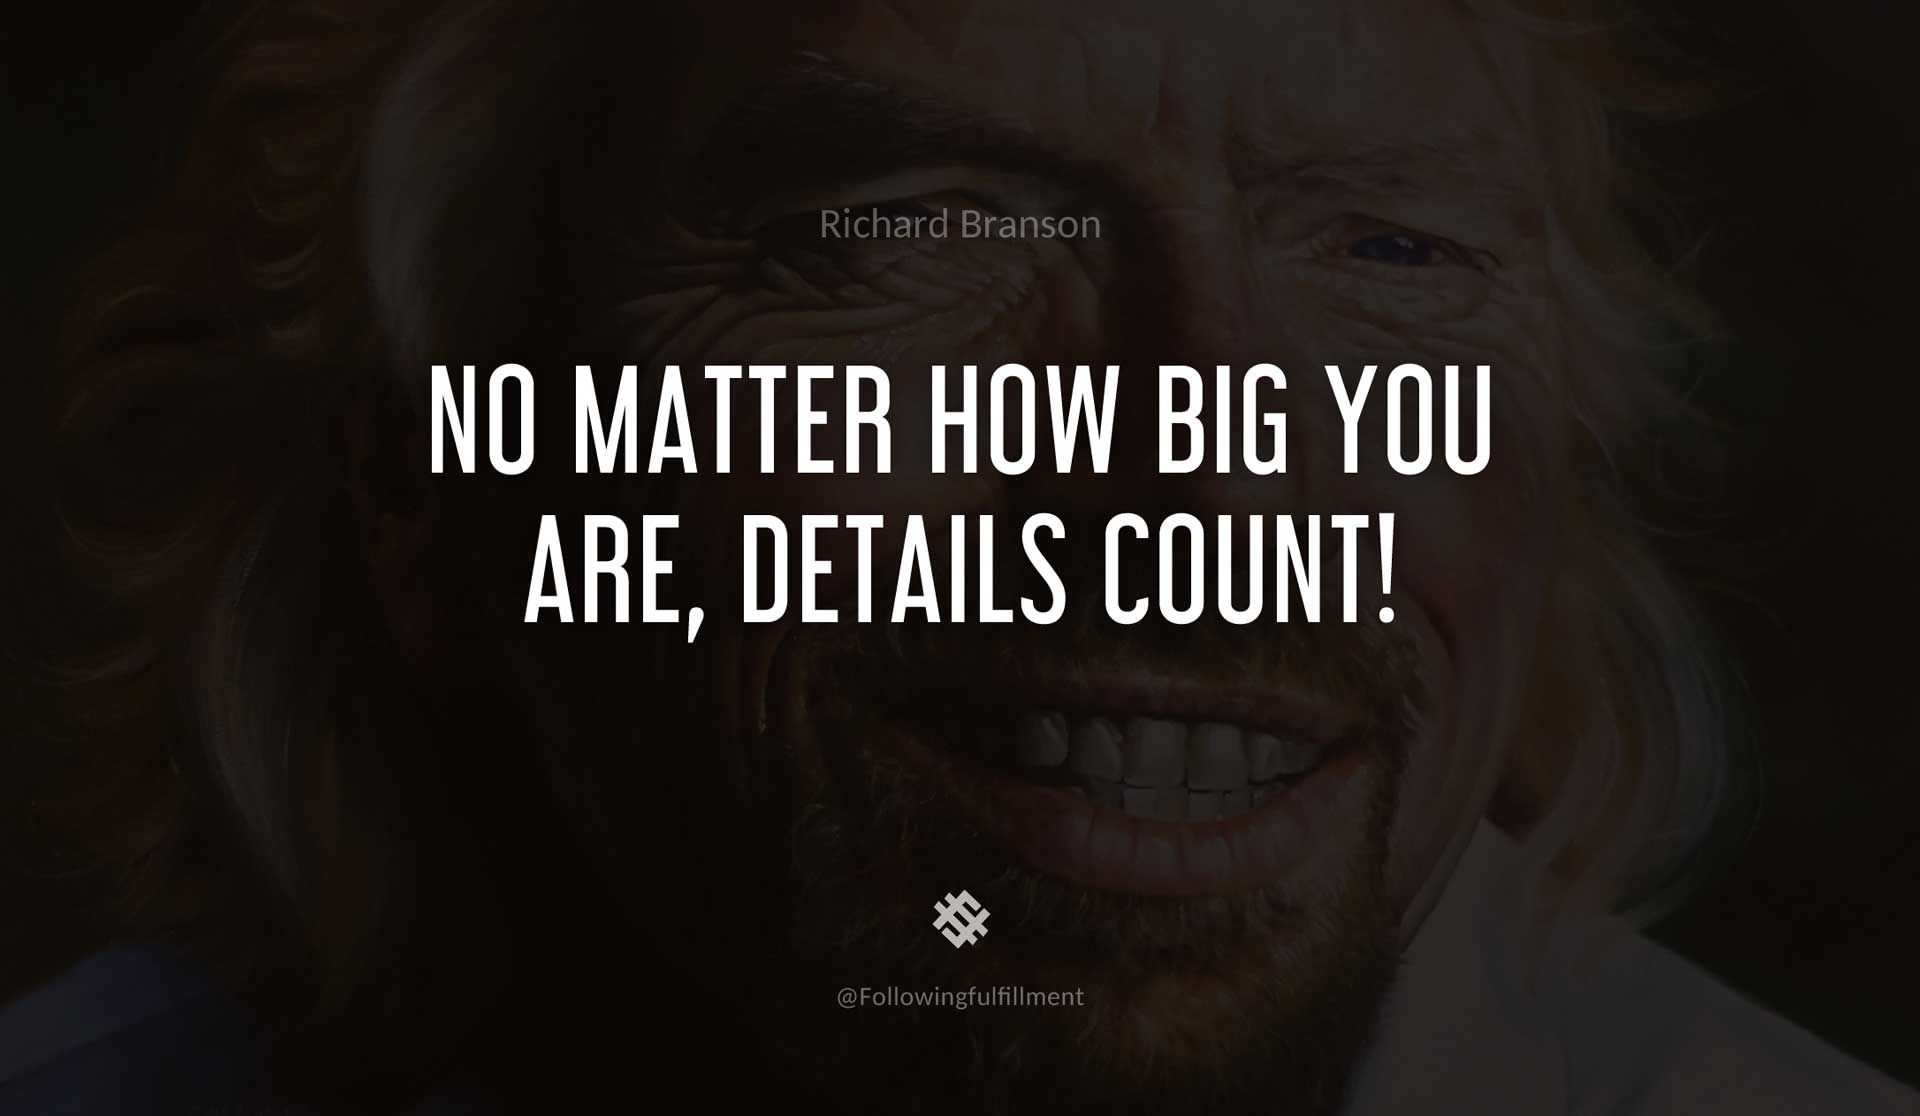 No-matter-how-big-you-are,-details-count!-RICHARD-BRANSON-Quote.jpg